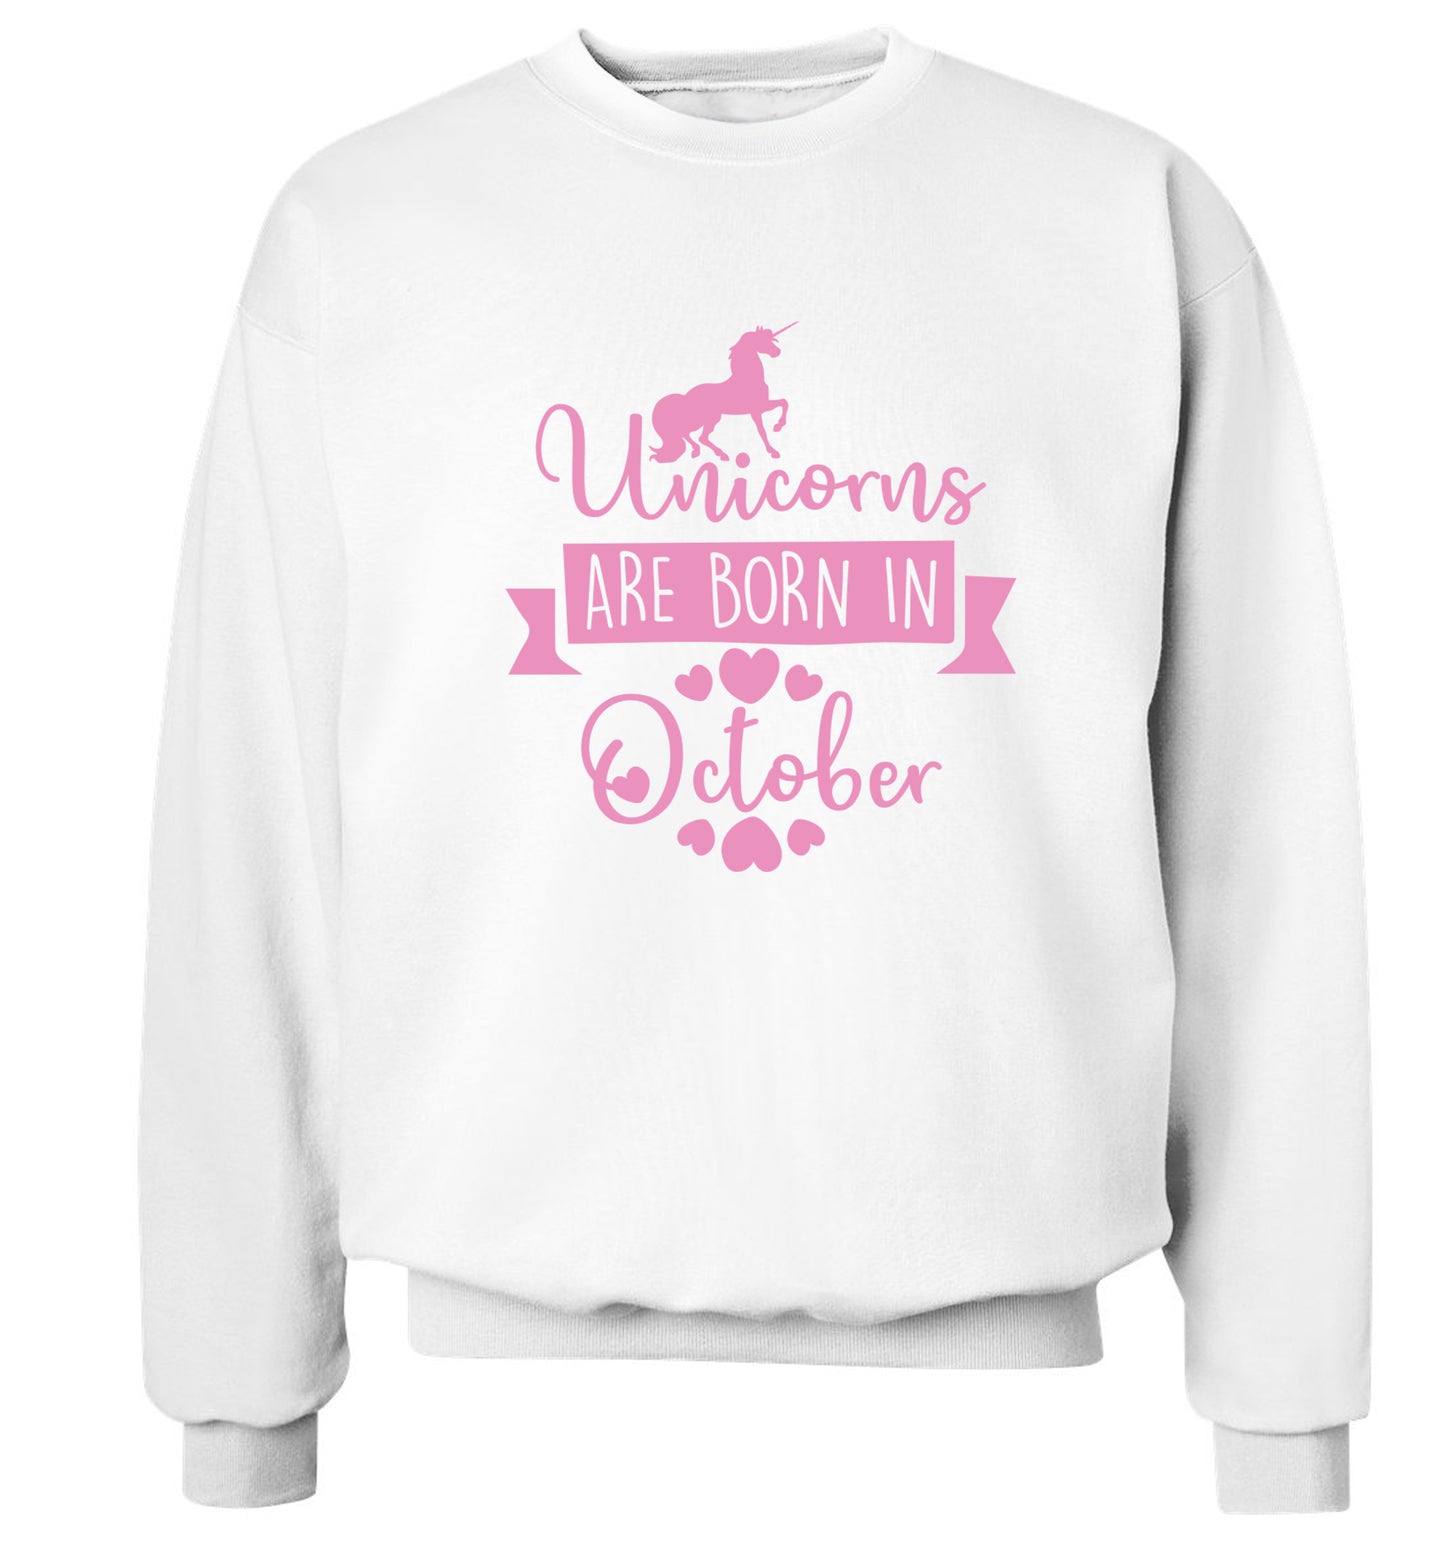 Unicorns are born in October Adult's unisex white Sweater 2XL